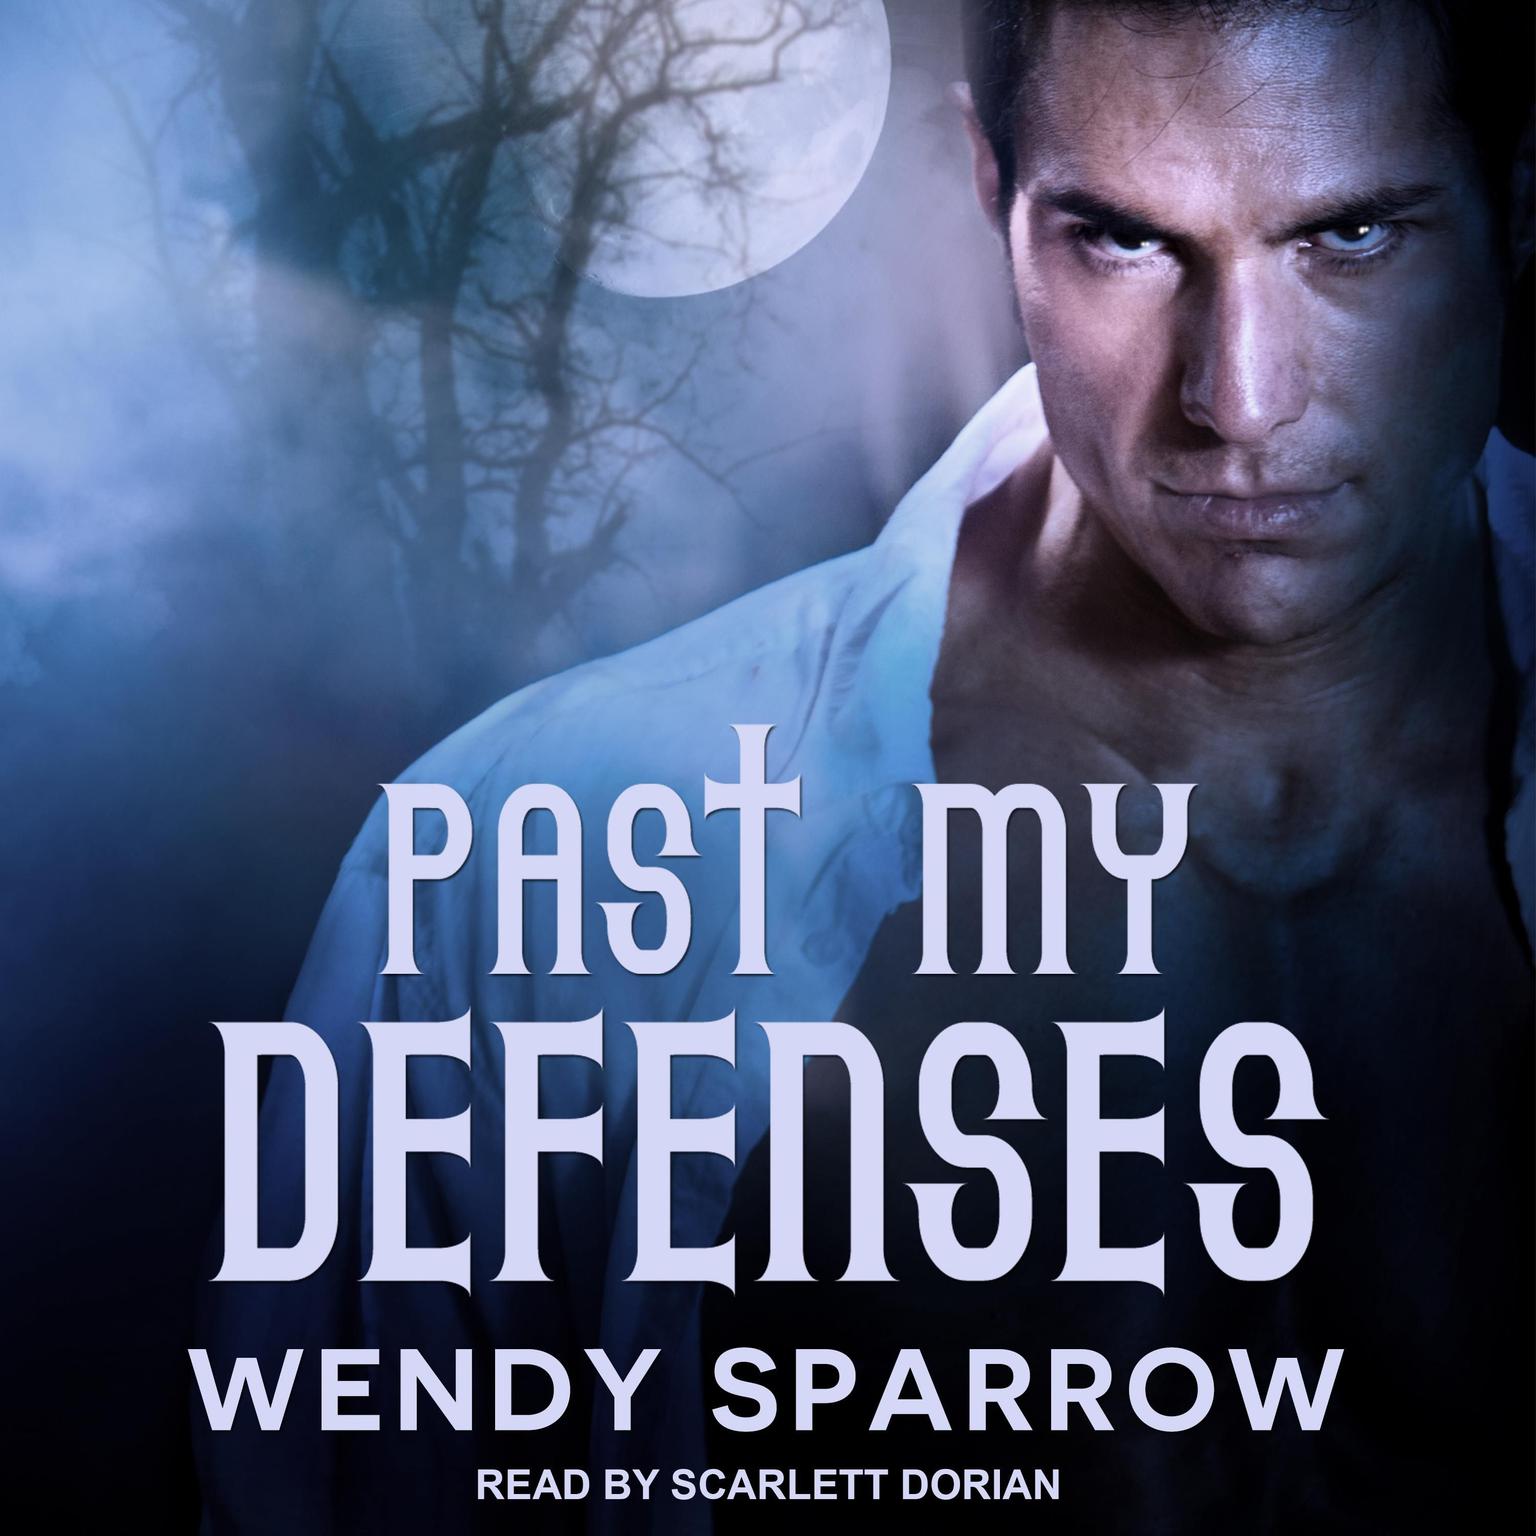 Past My Defenses Audiobook, by Wendy Sparrow